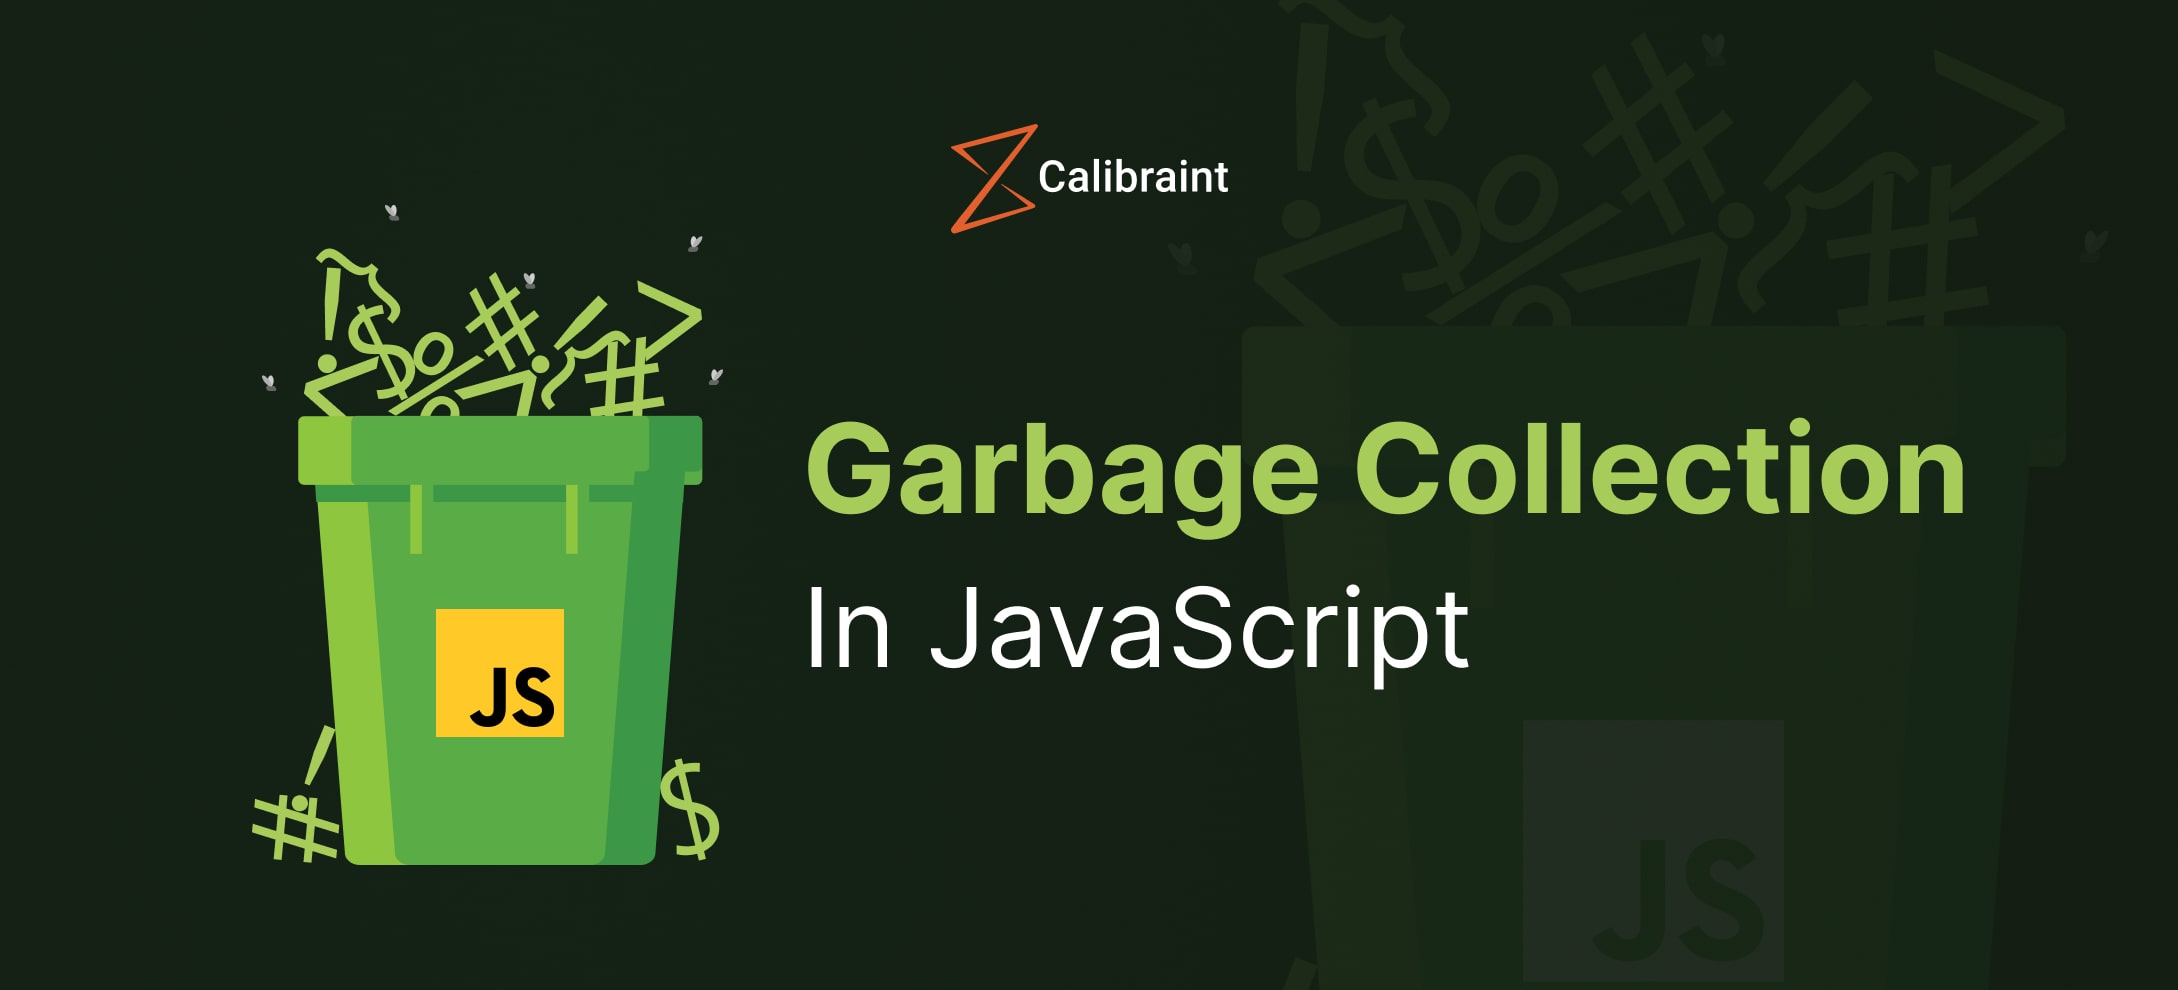 JavaScript uses a garbage collection mechanism to manage memory automatically